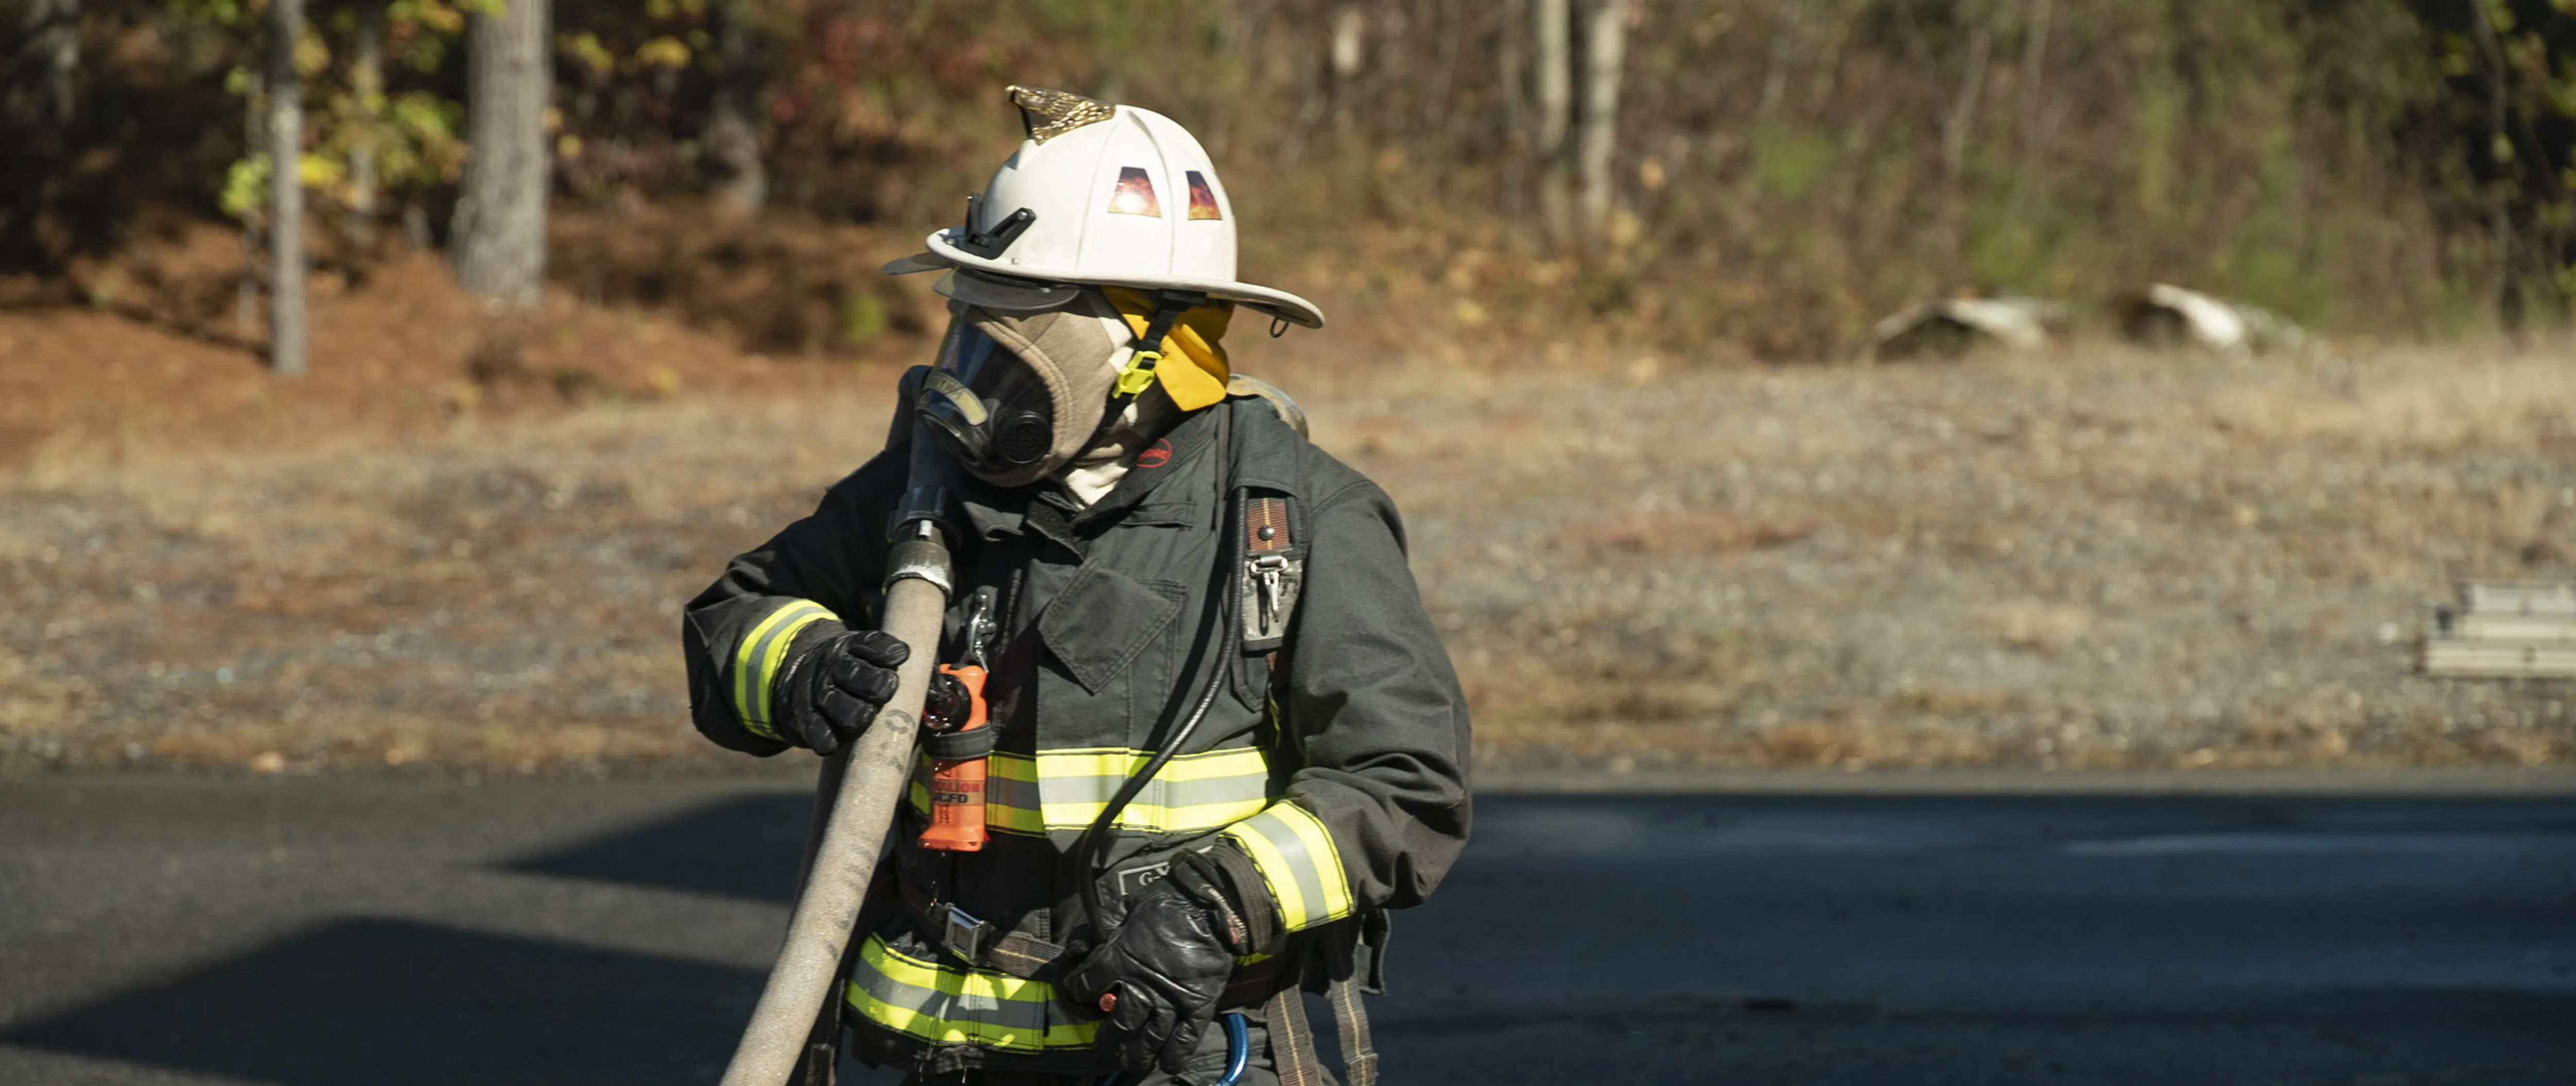 Firefighter carrying a hose